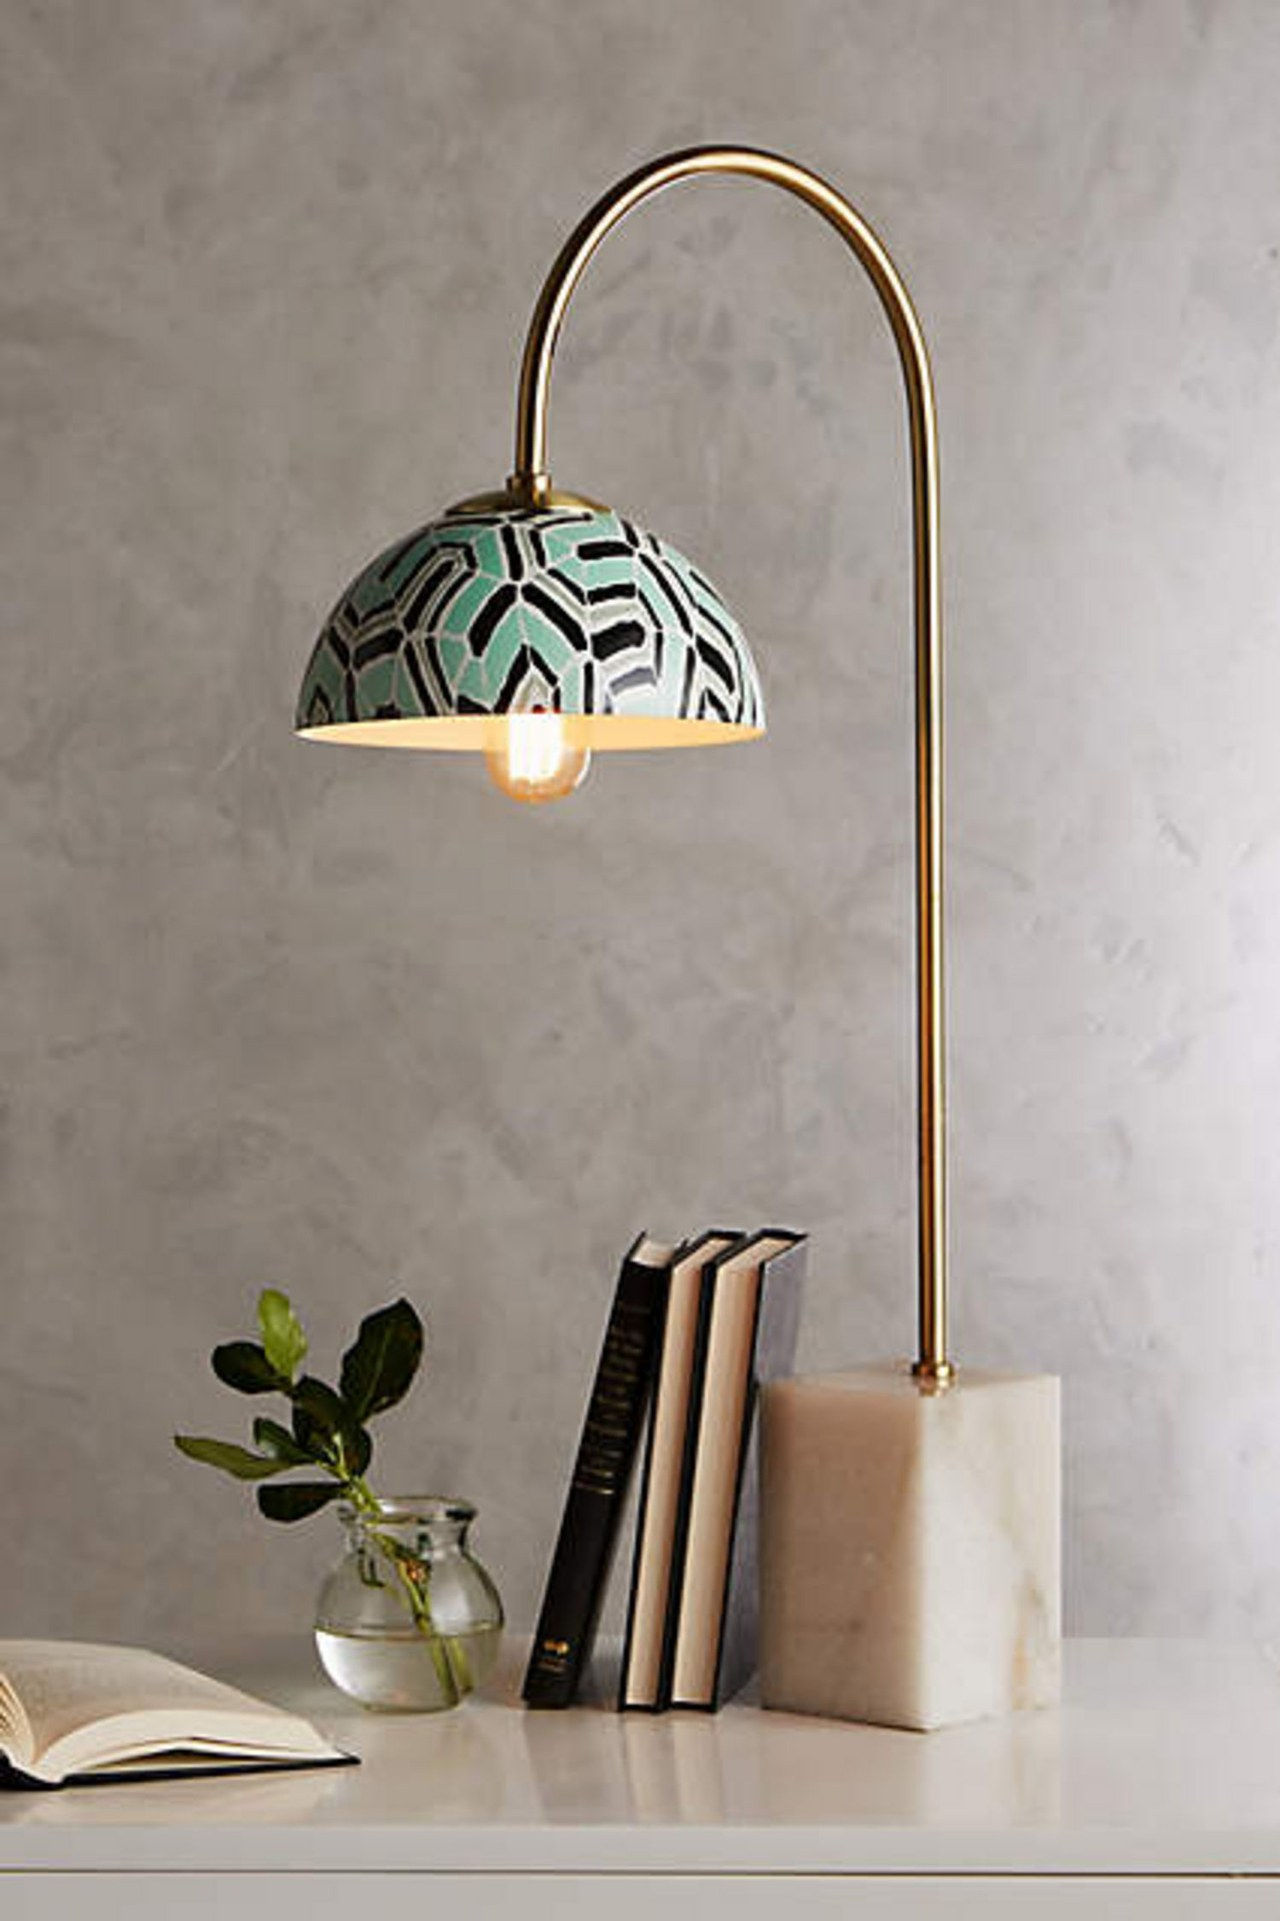 06 ceiling lights table lamps floor lamp 0222 courtesy vendor